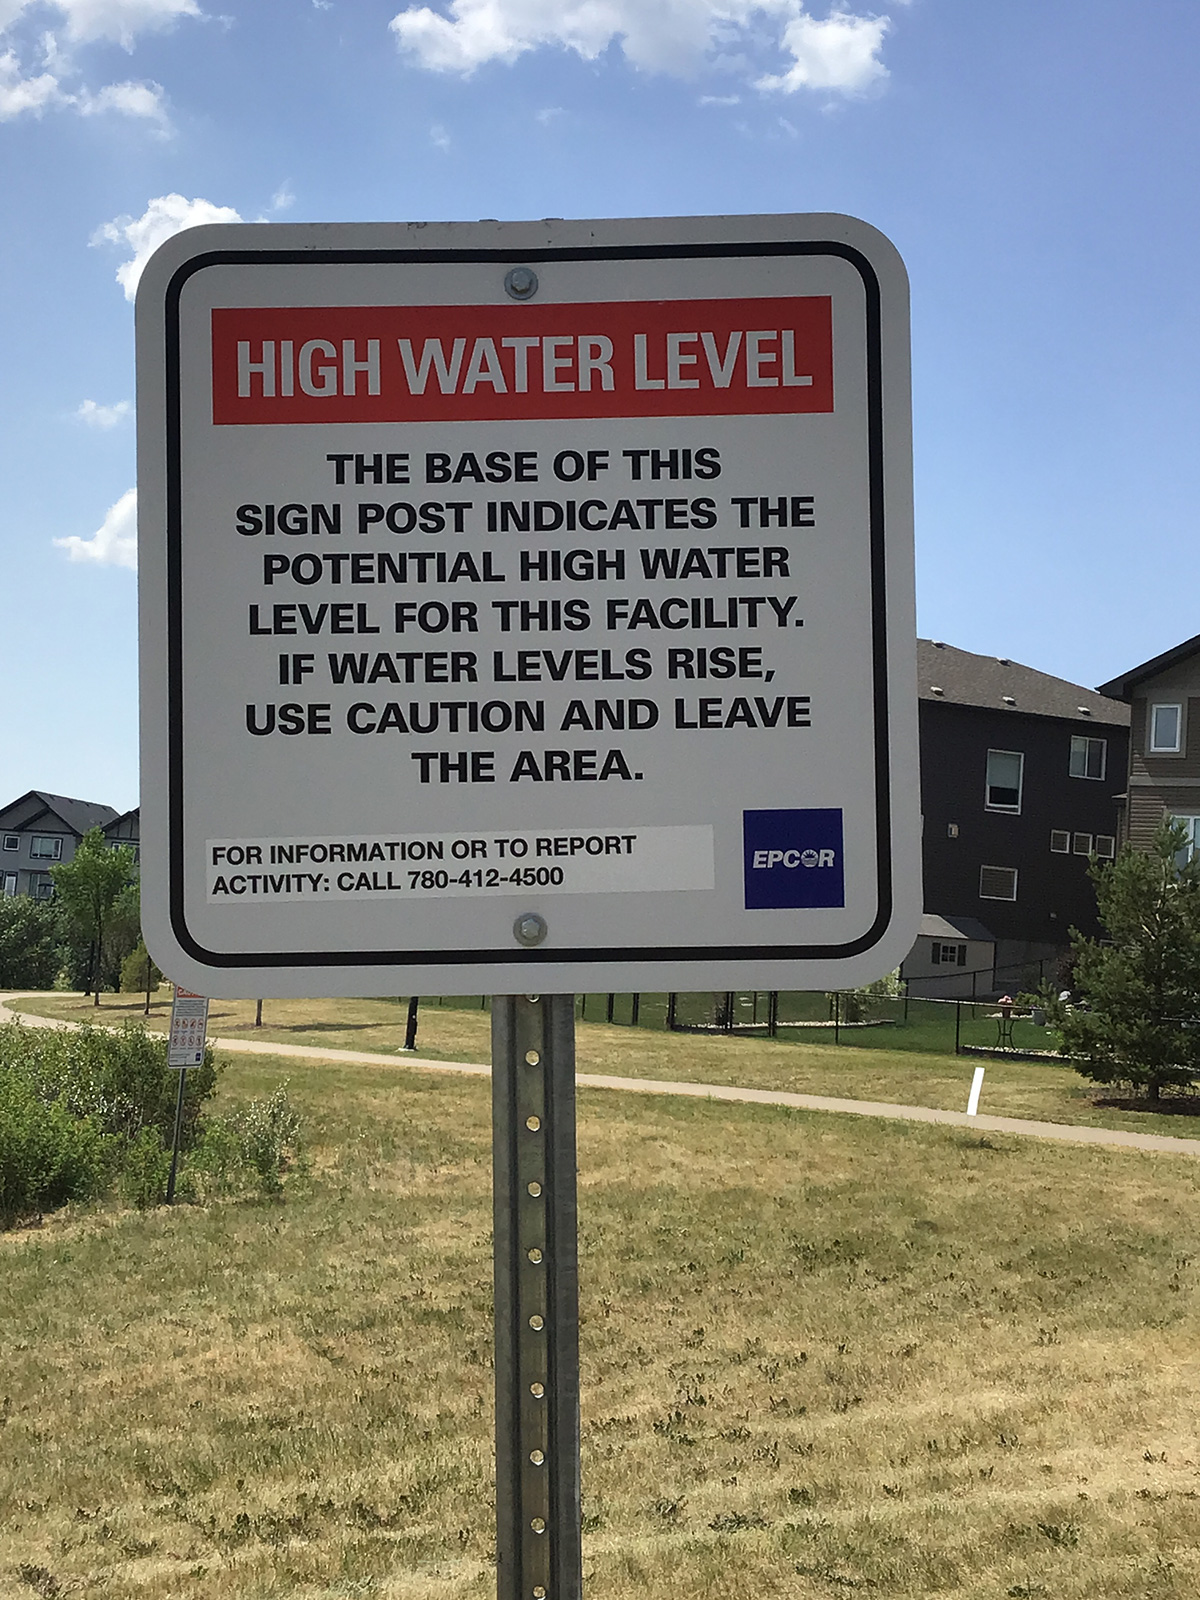 A sign at a stormwater facility indicating the high water line level